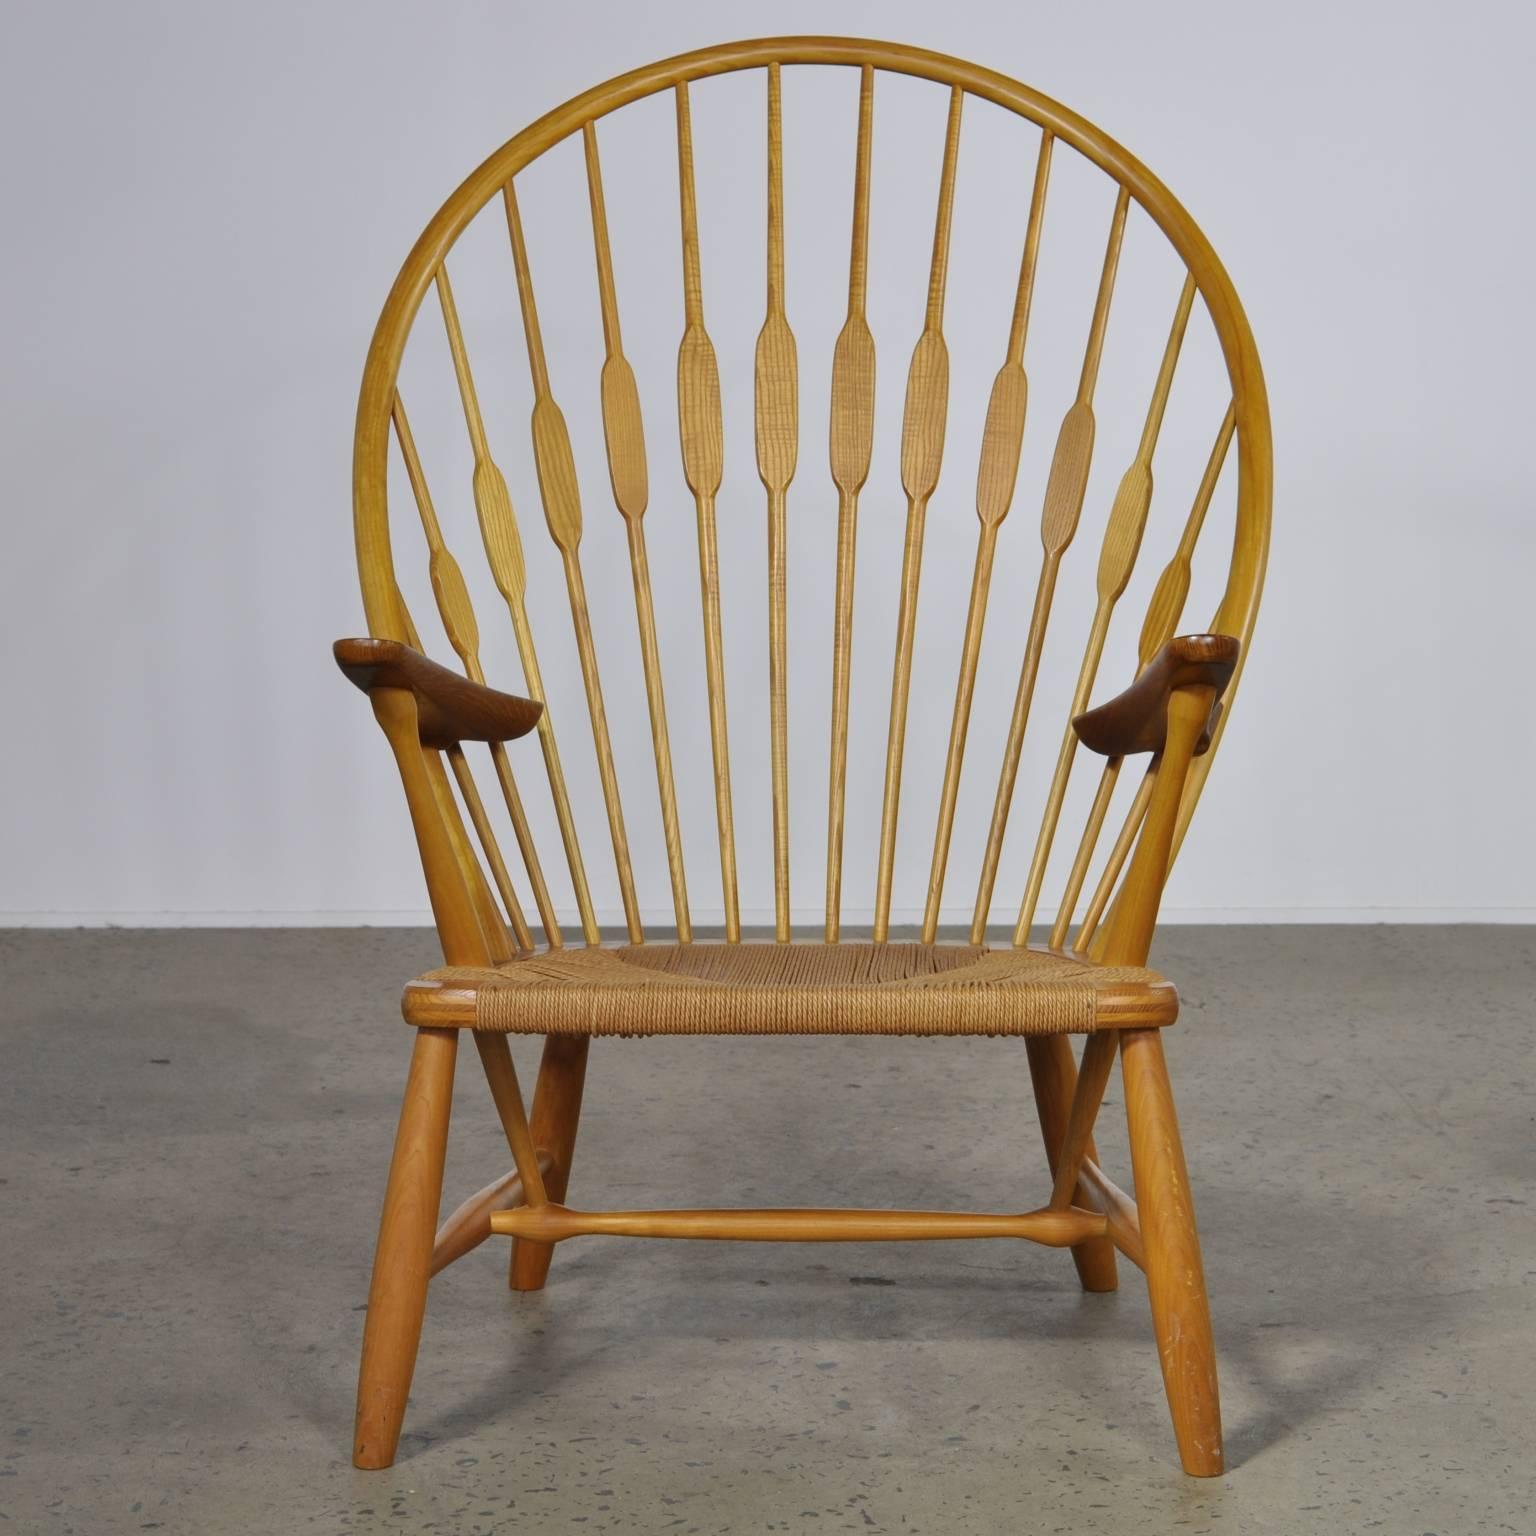 Original vintage peacock chair in oak.

A blend of exceptional woodworking and fine design. The Hans Wegner peacock chair (as coined by Finn Juhl) debuted in 1947. Wegner took inspiration from earlier designs and applied his unique design ability